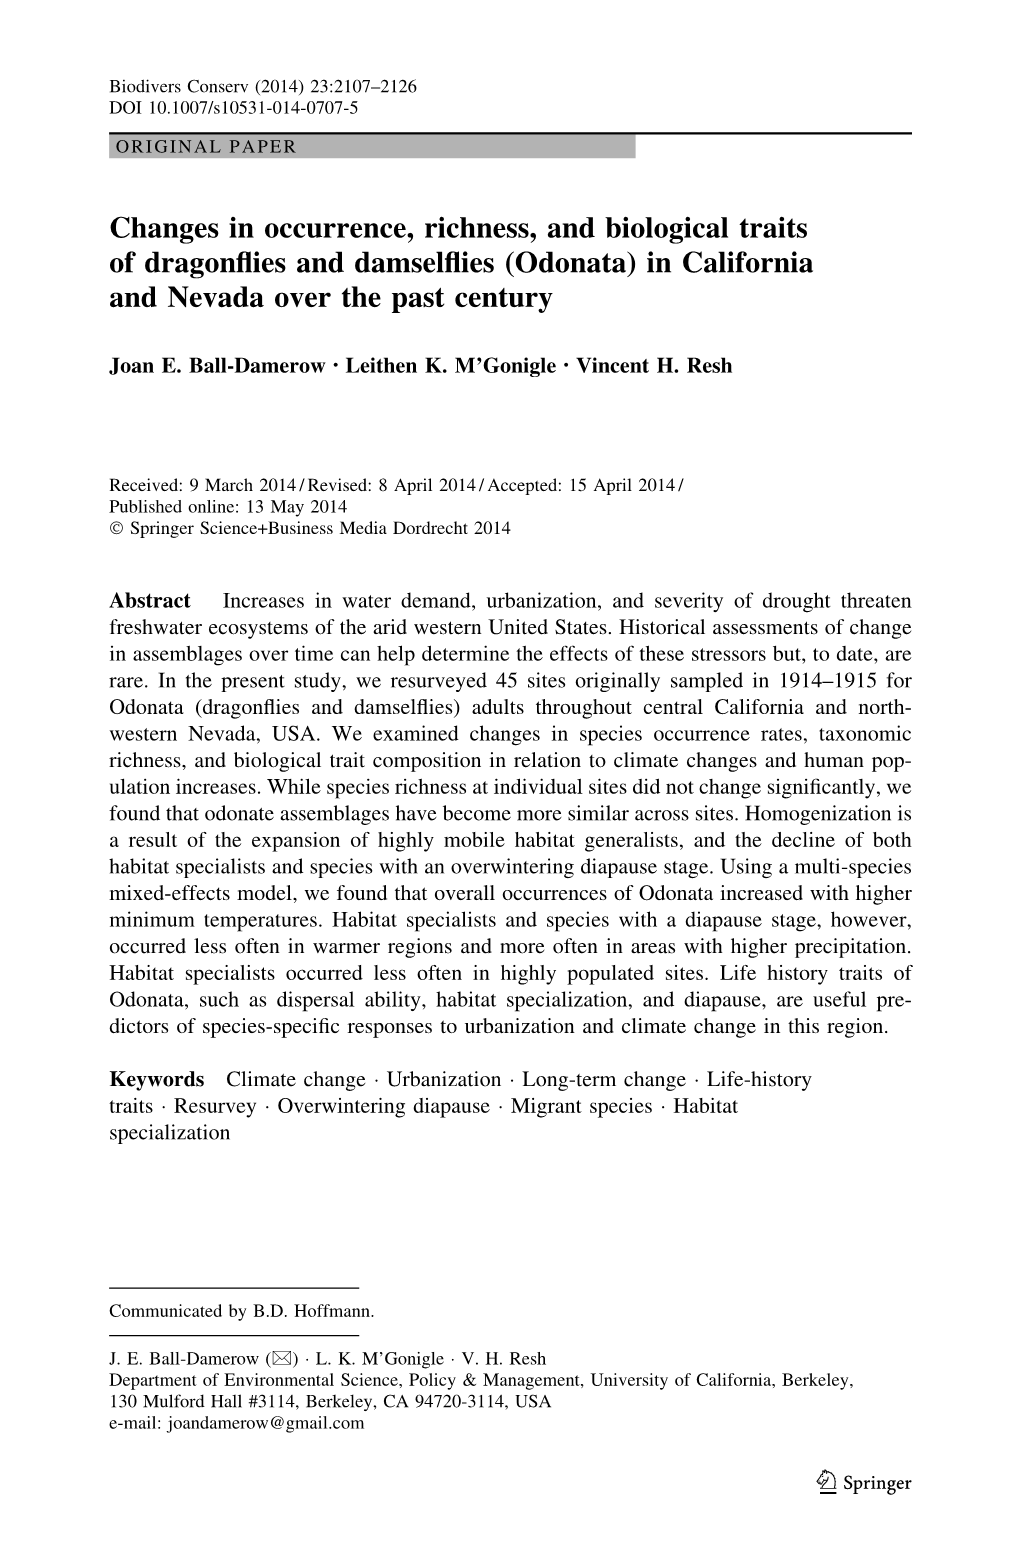 Changes in Occurrence, Richness, and Biological Traits of Dragonflies and Damselflies (Odonata) in California and Nevada Over Th